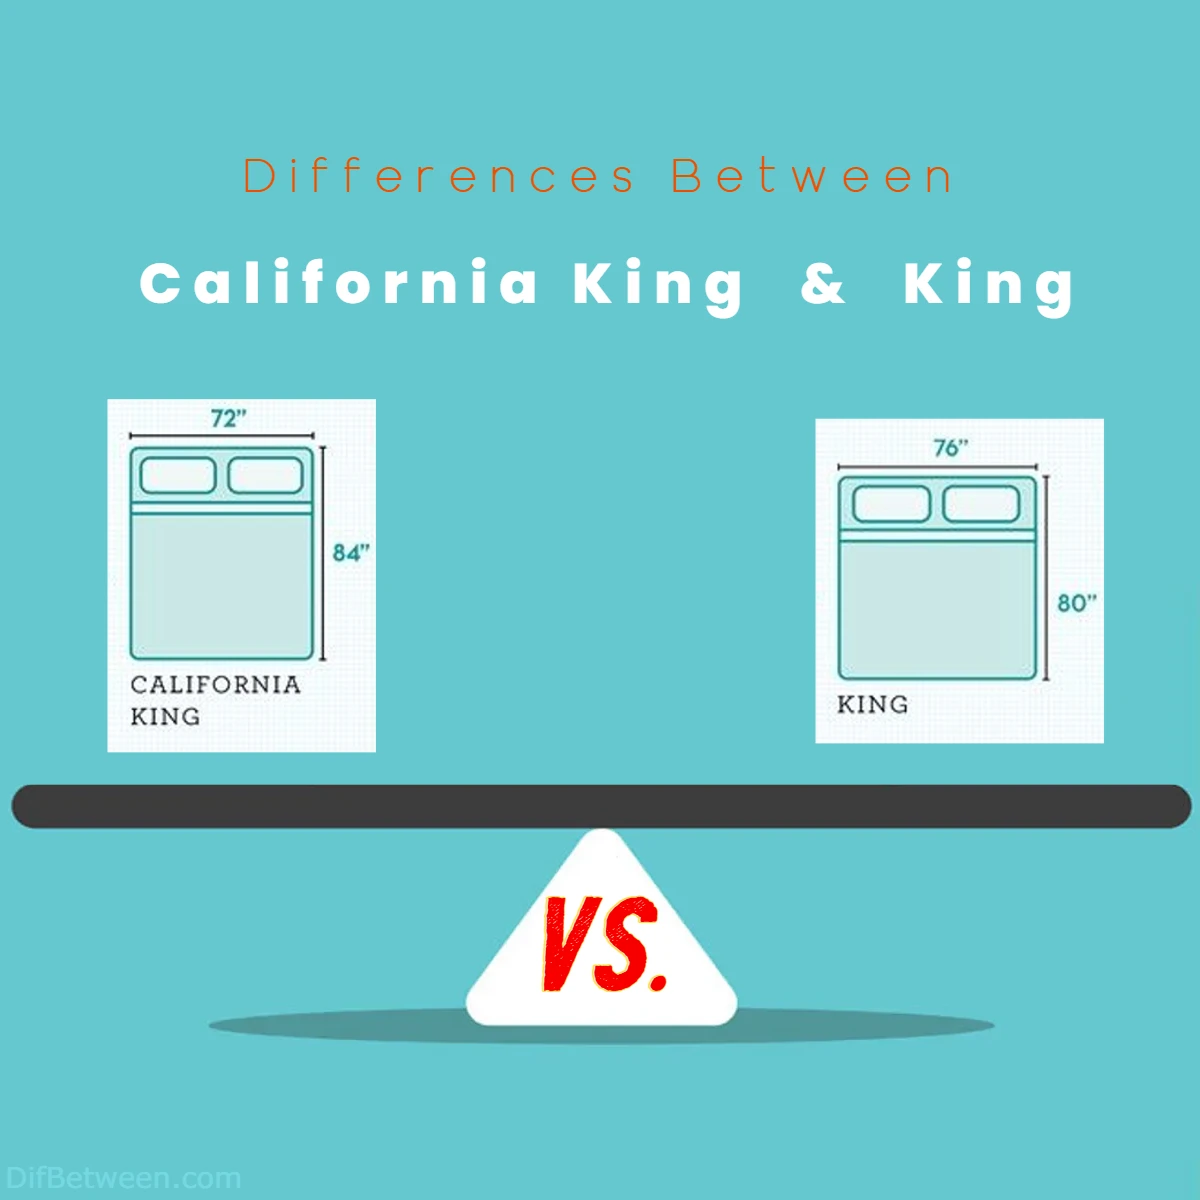 Differences Between California King vs King